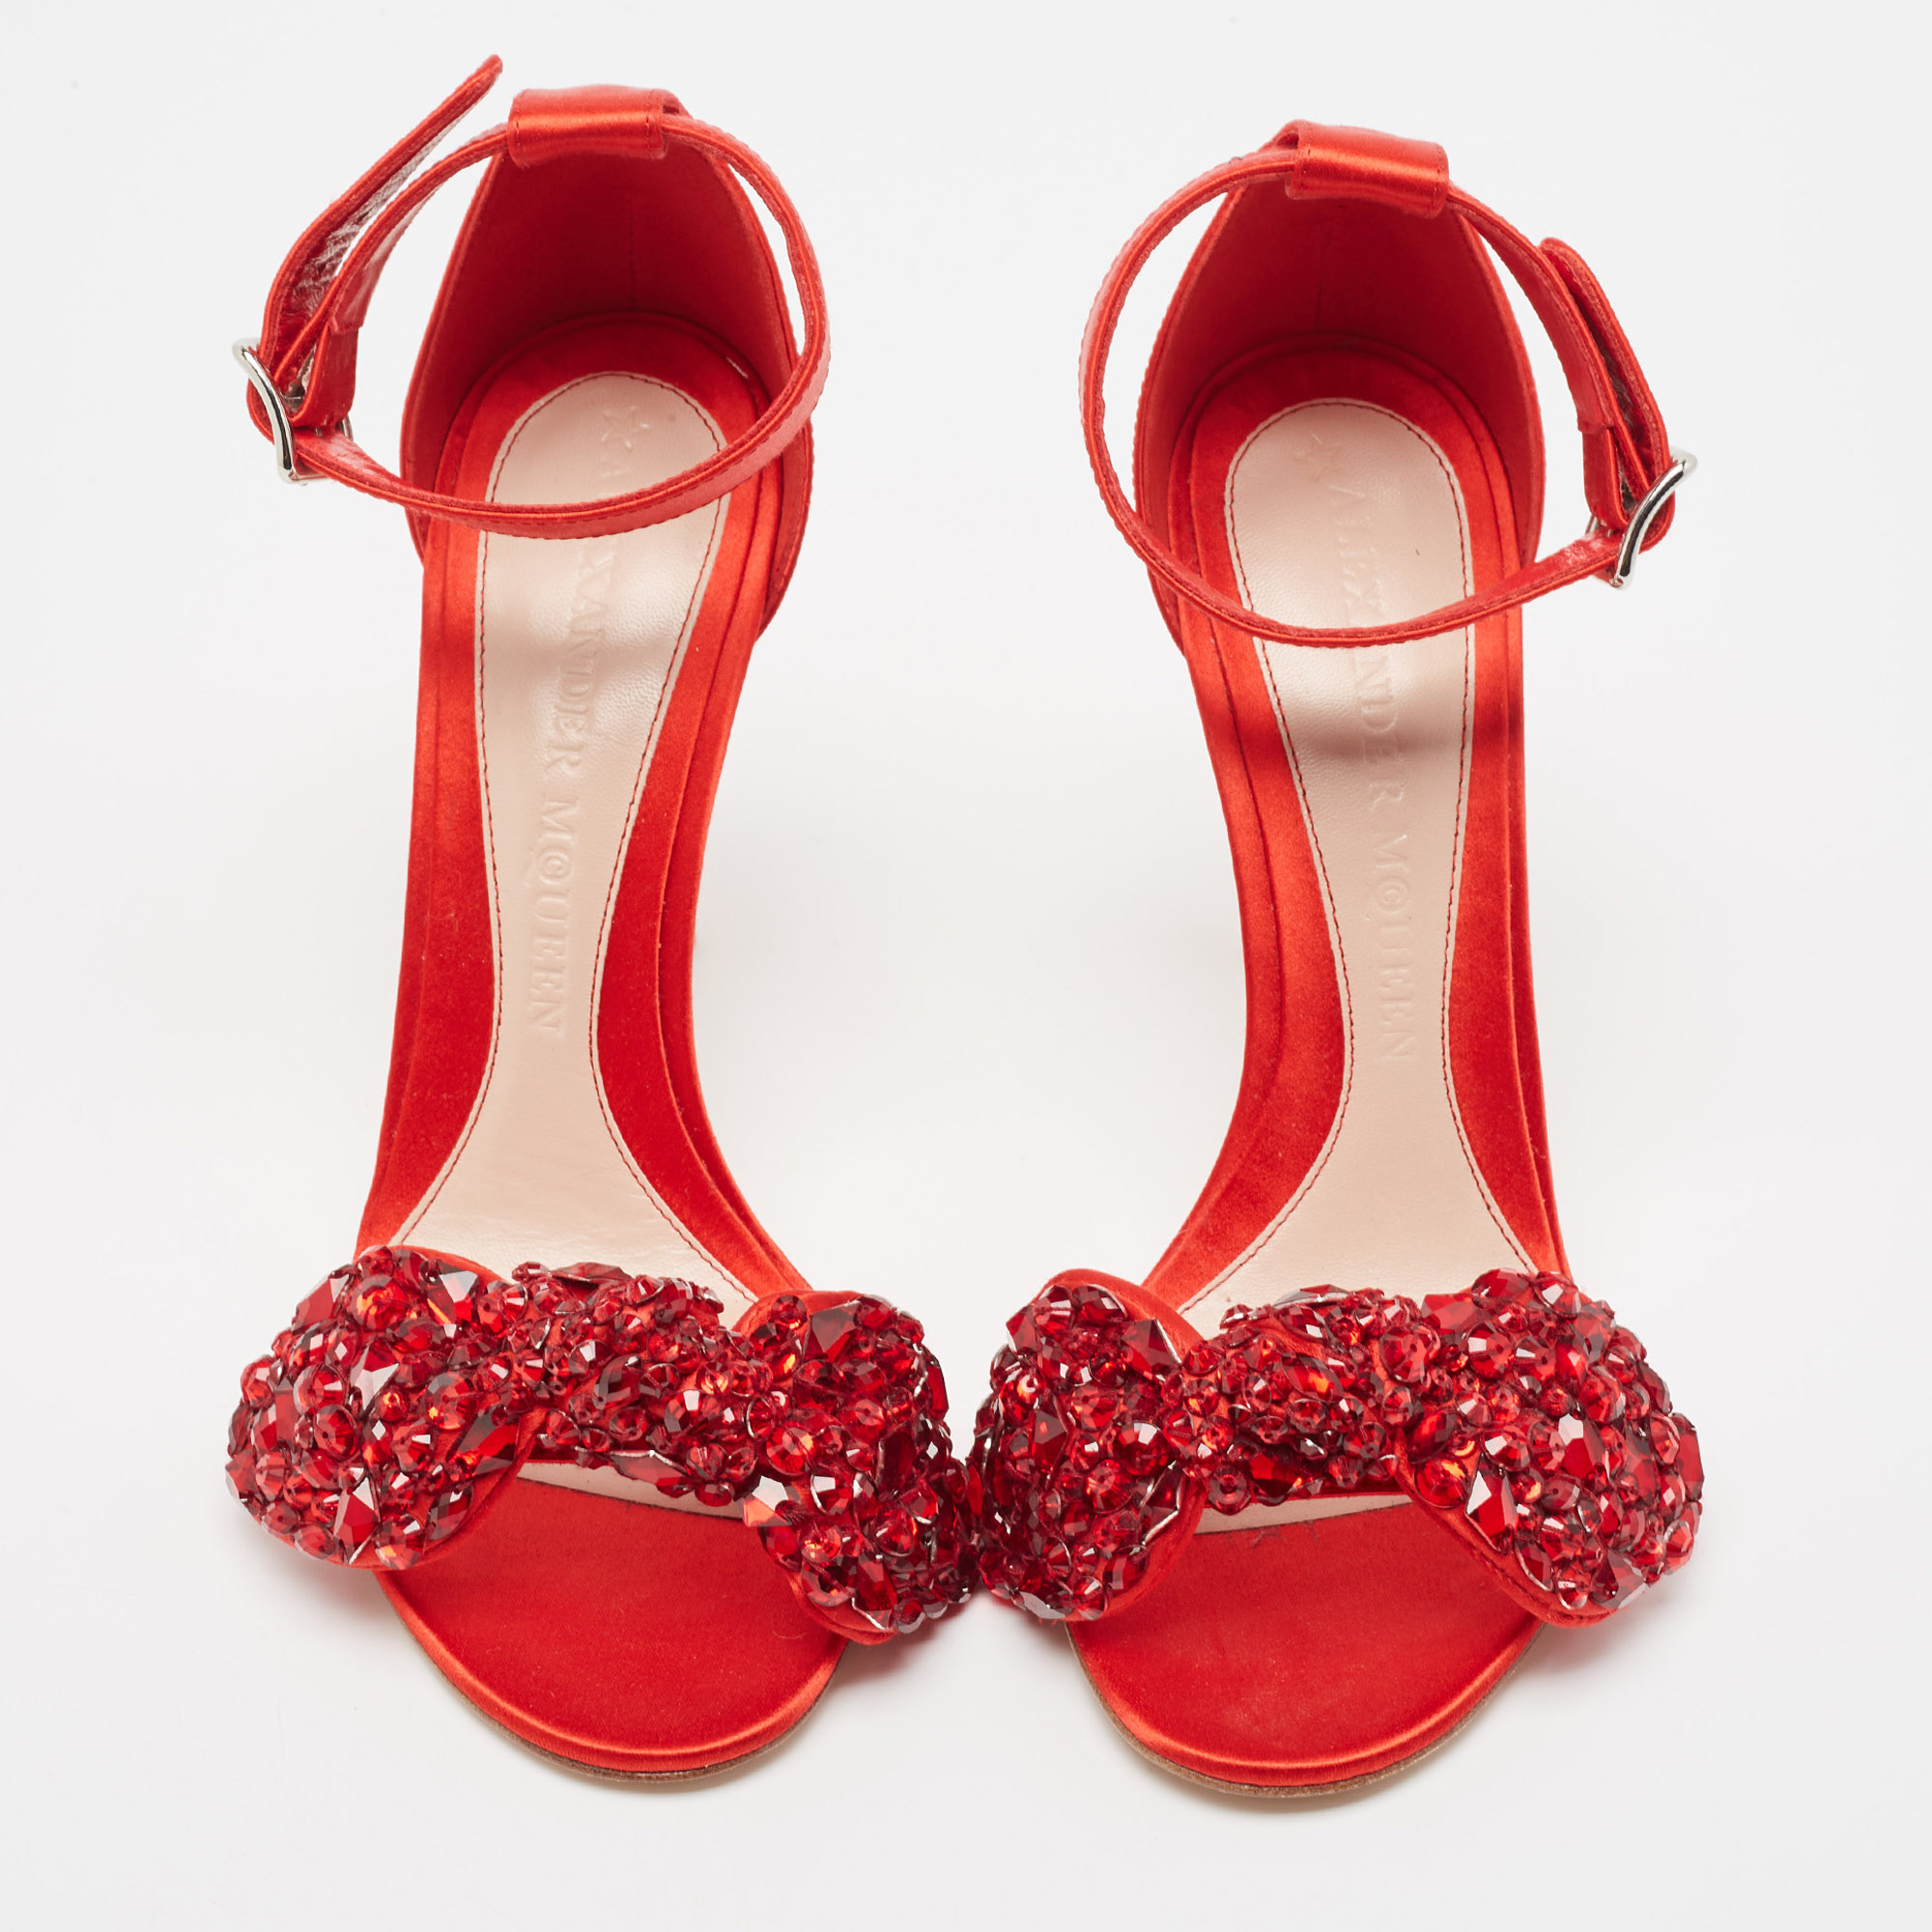 Alexander McQueen Red Satin Embellished Jewel Bow Ankle Strap Sandals Size 37